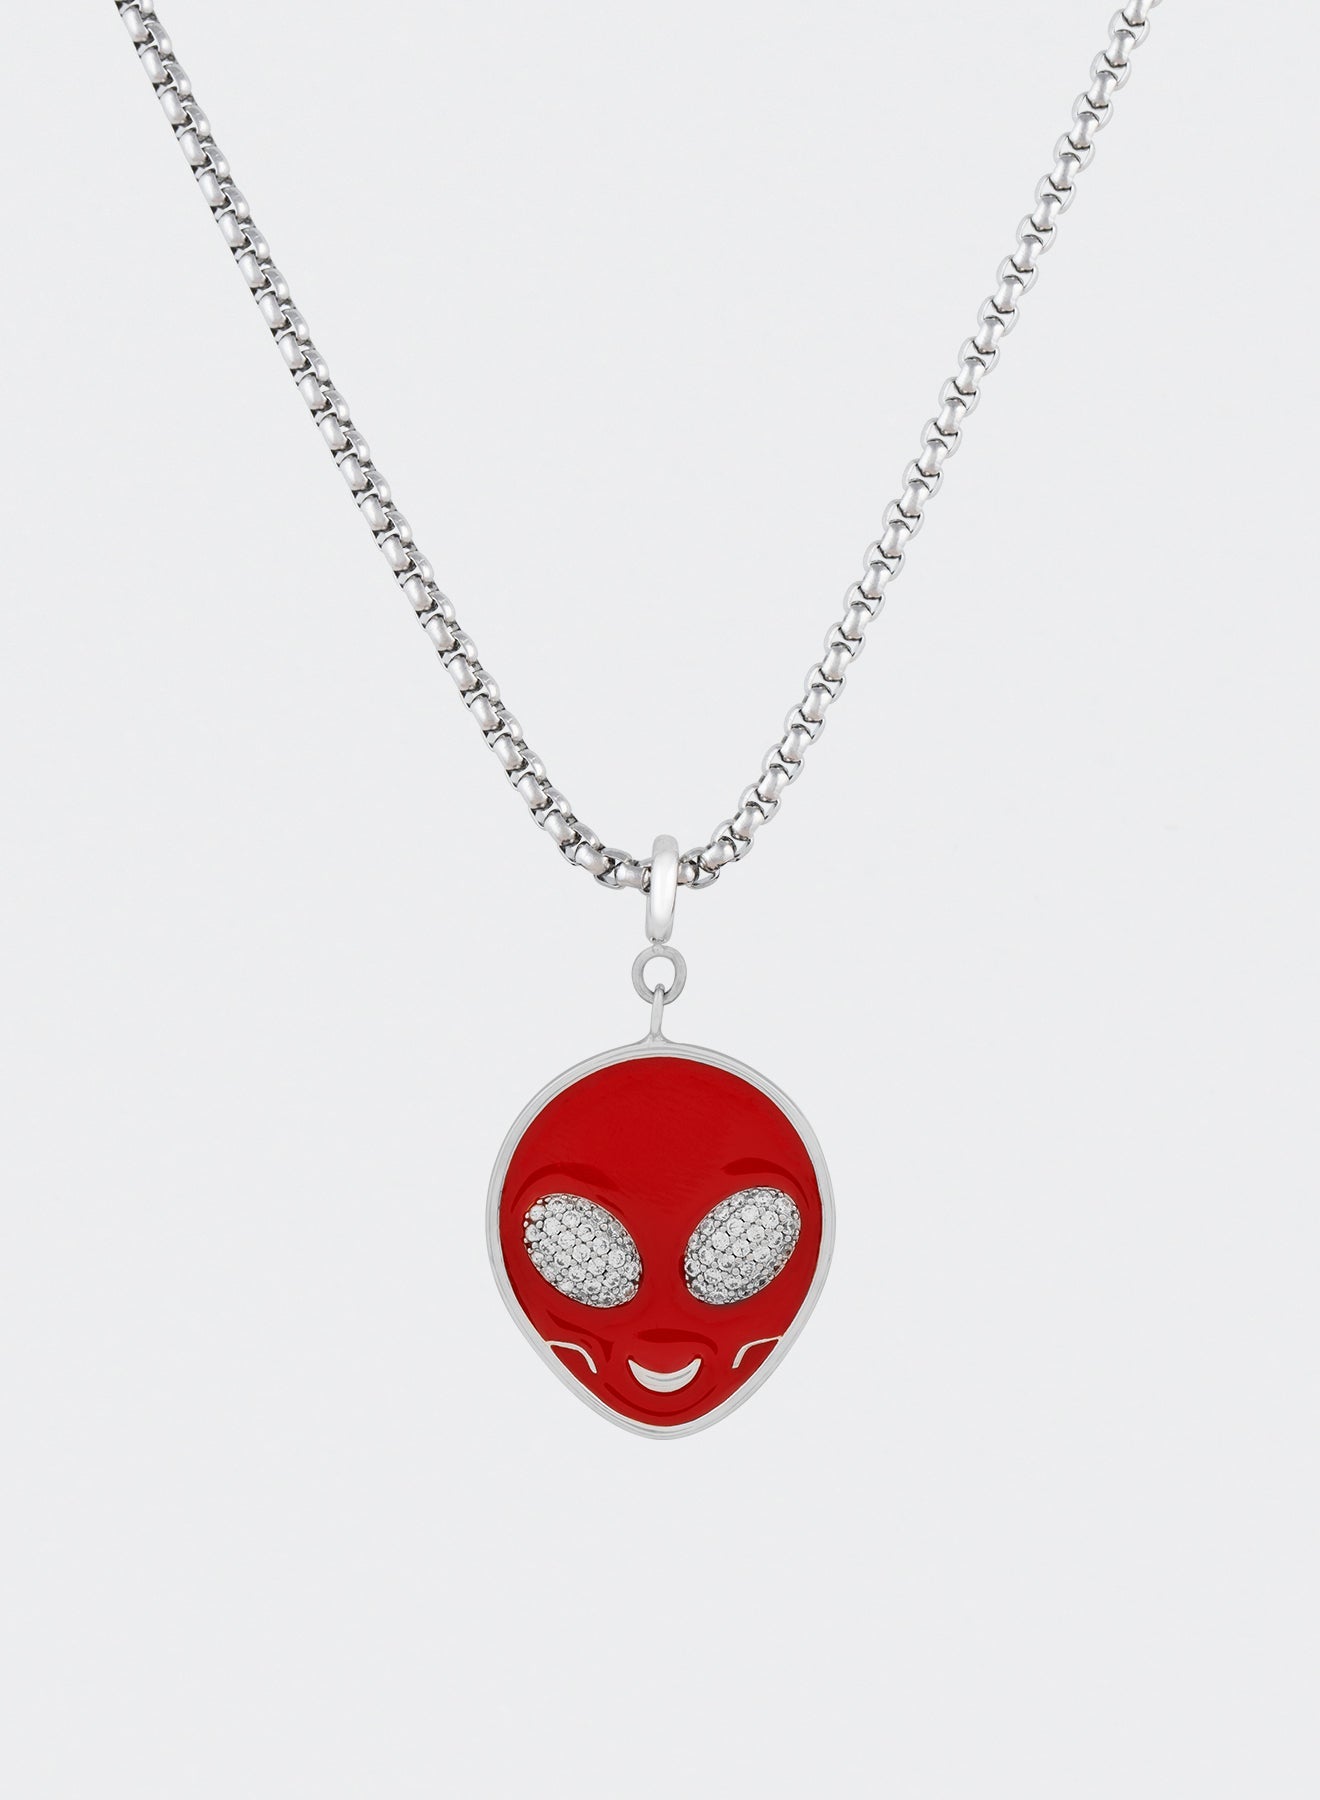 18k white gold coated alien pendant necklace with hand-set micropavé stones in white on red hand painted glow in the dark alien pendant and 3mm rolo chain